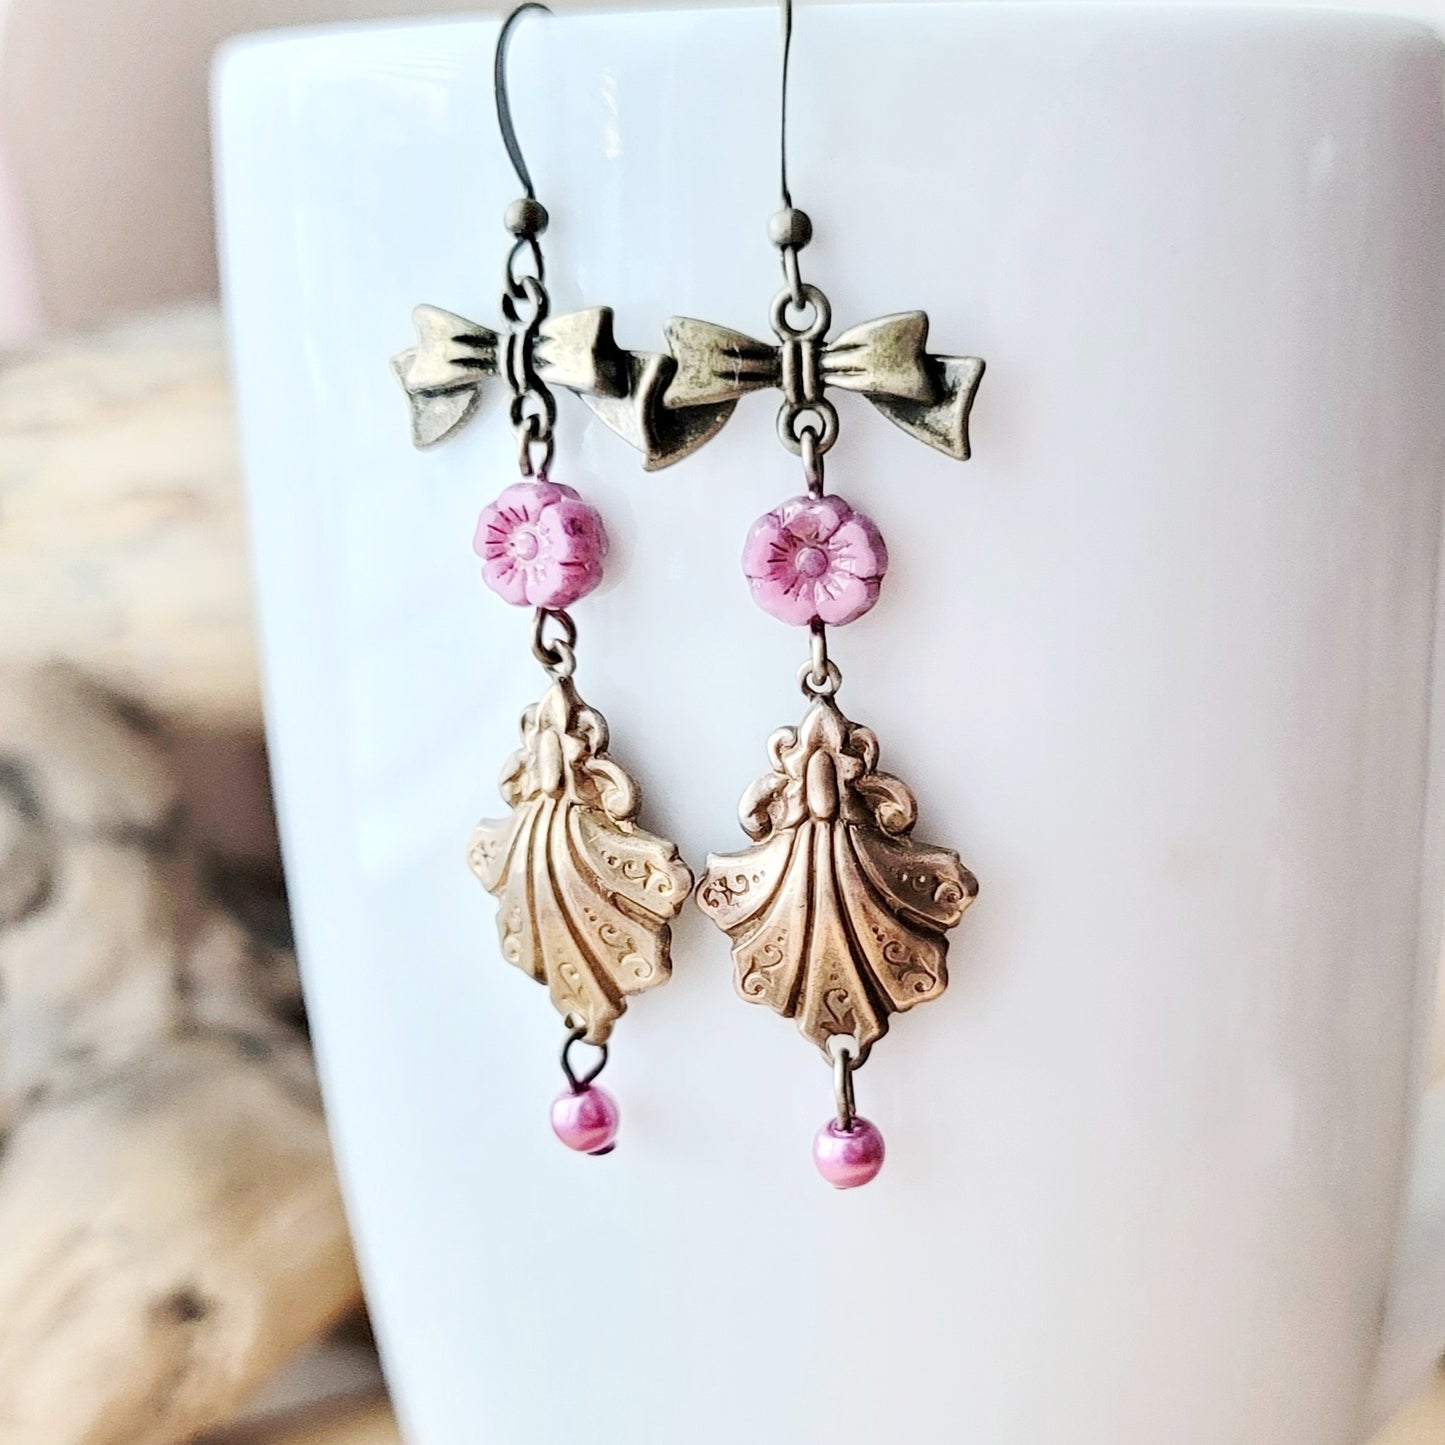 Vintage Romance Flower Shell Bow Earrings made with Upcycled Vintage Shells, Pink Flowers and Bows. Displayed on white mug